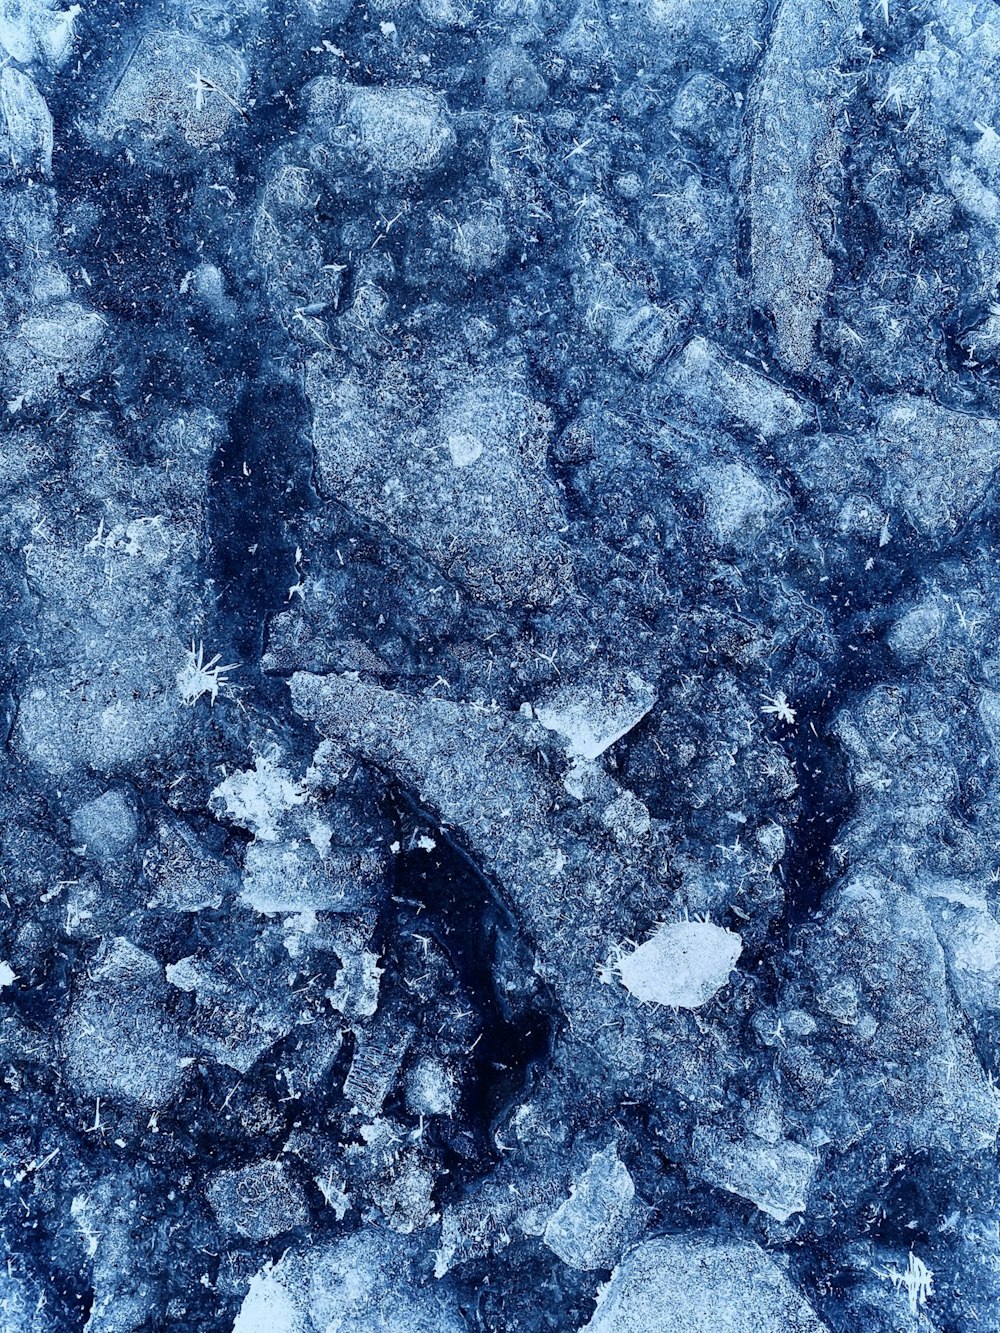 a close up view of ice and rocks